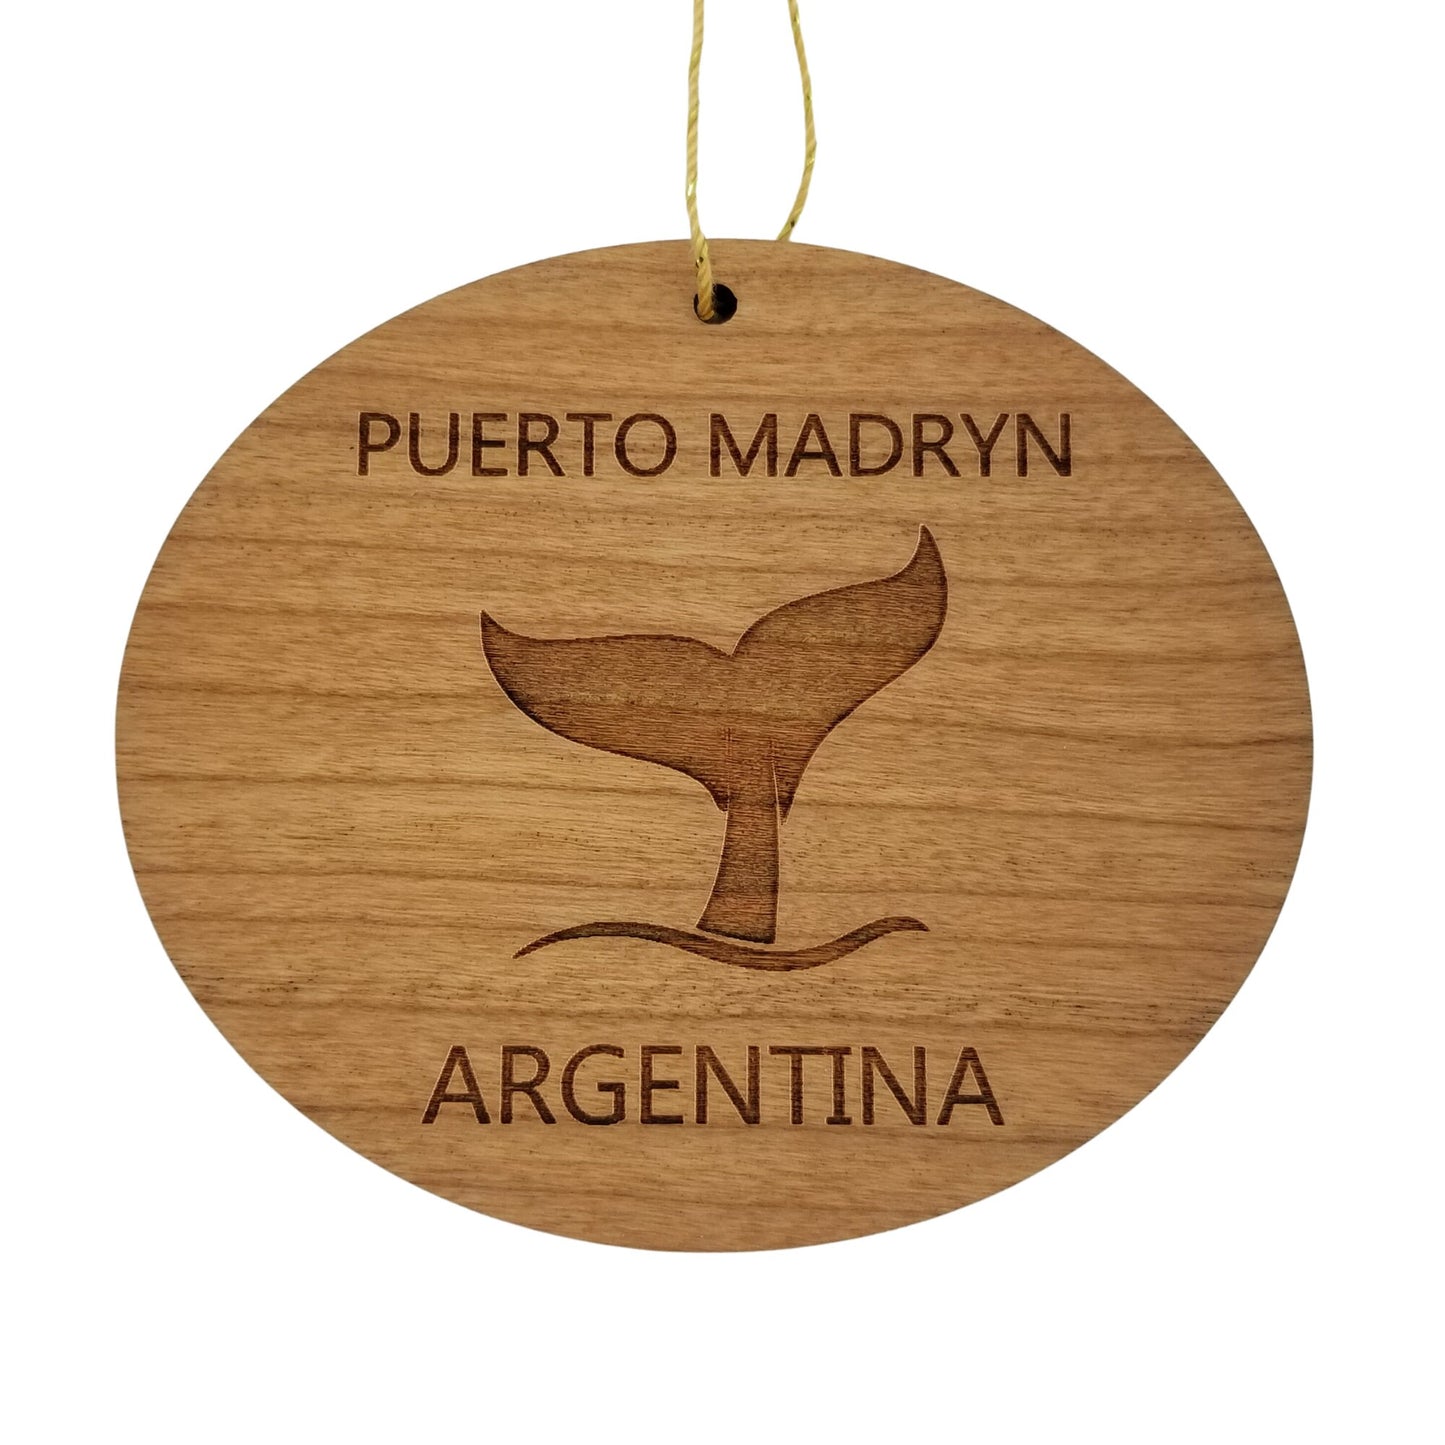 Puerto Madryn Argentina Ornament - Handmade Wood Ornament - Whale Tail Whale Watching - Christmas Ornament 3 Inch